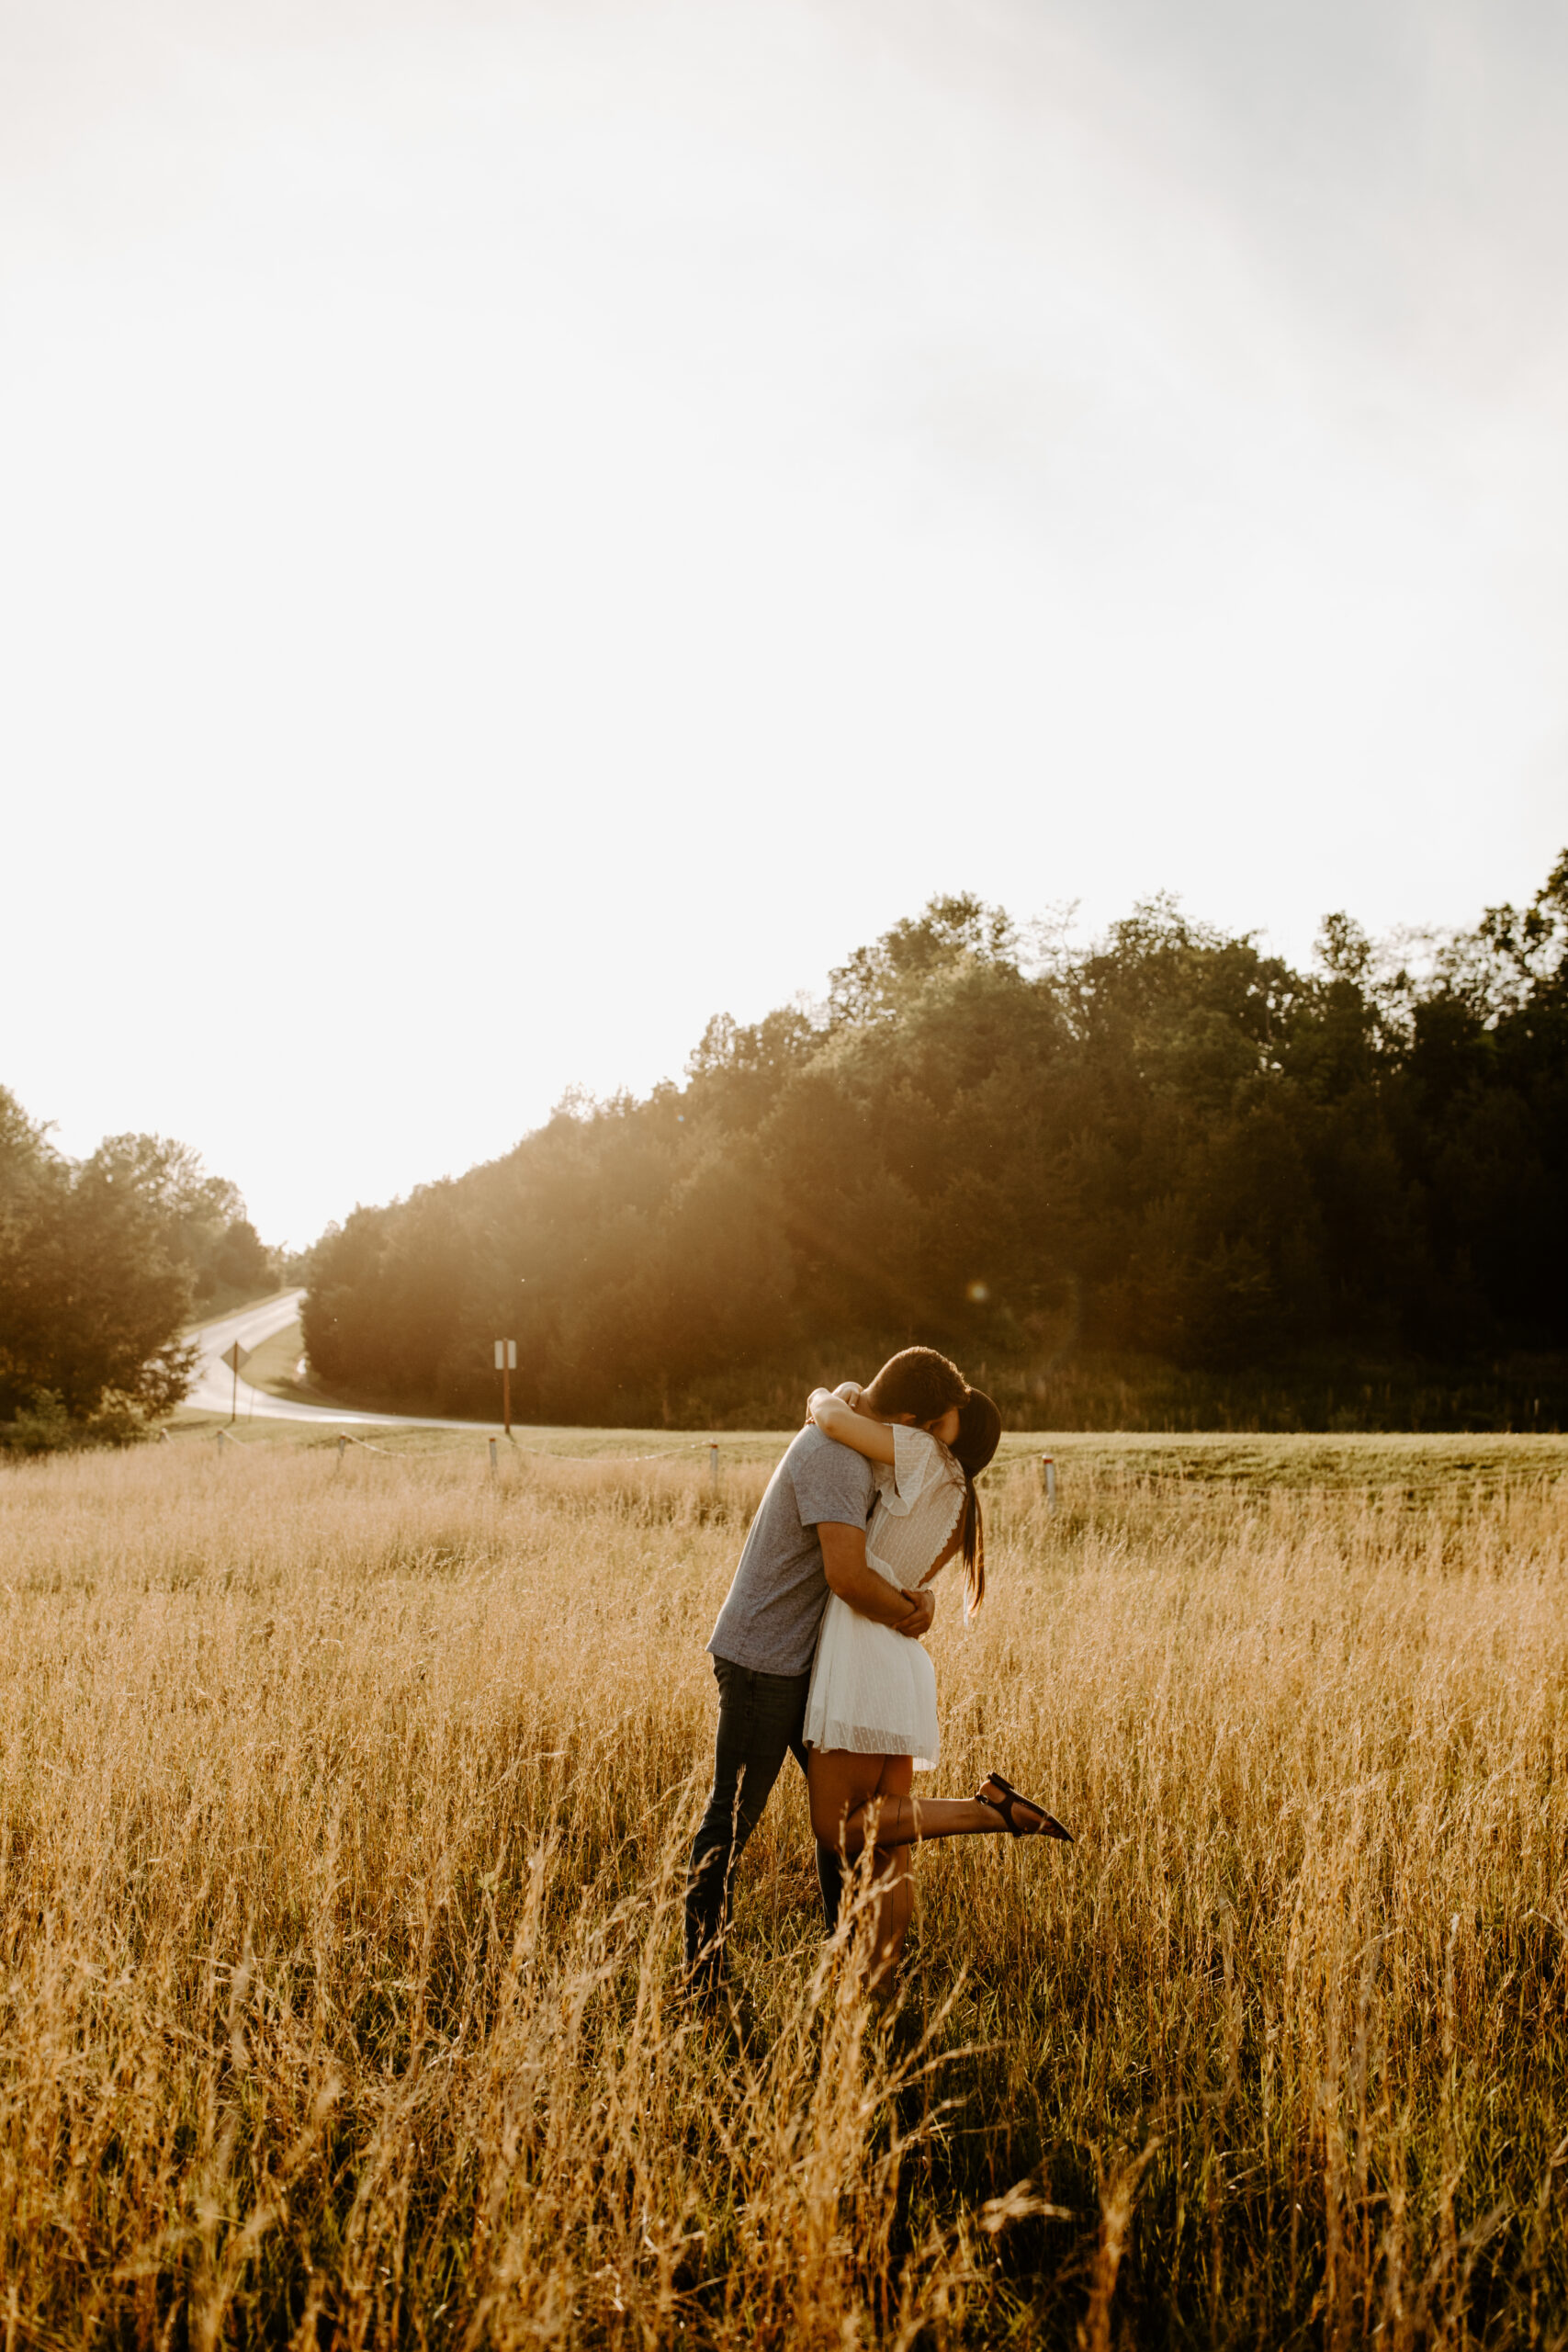 Couples' Engagement photos in an open field during golden hour.